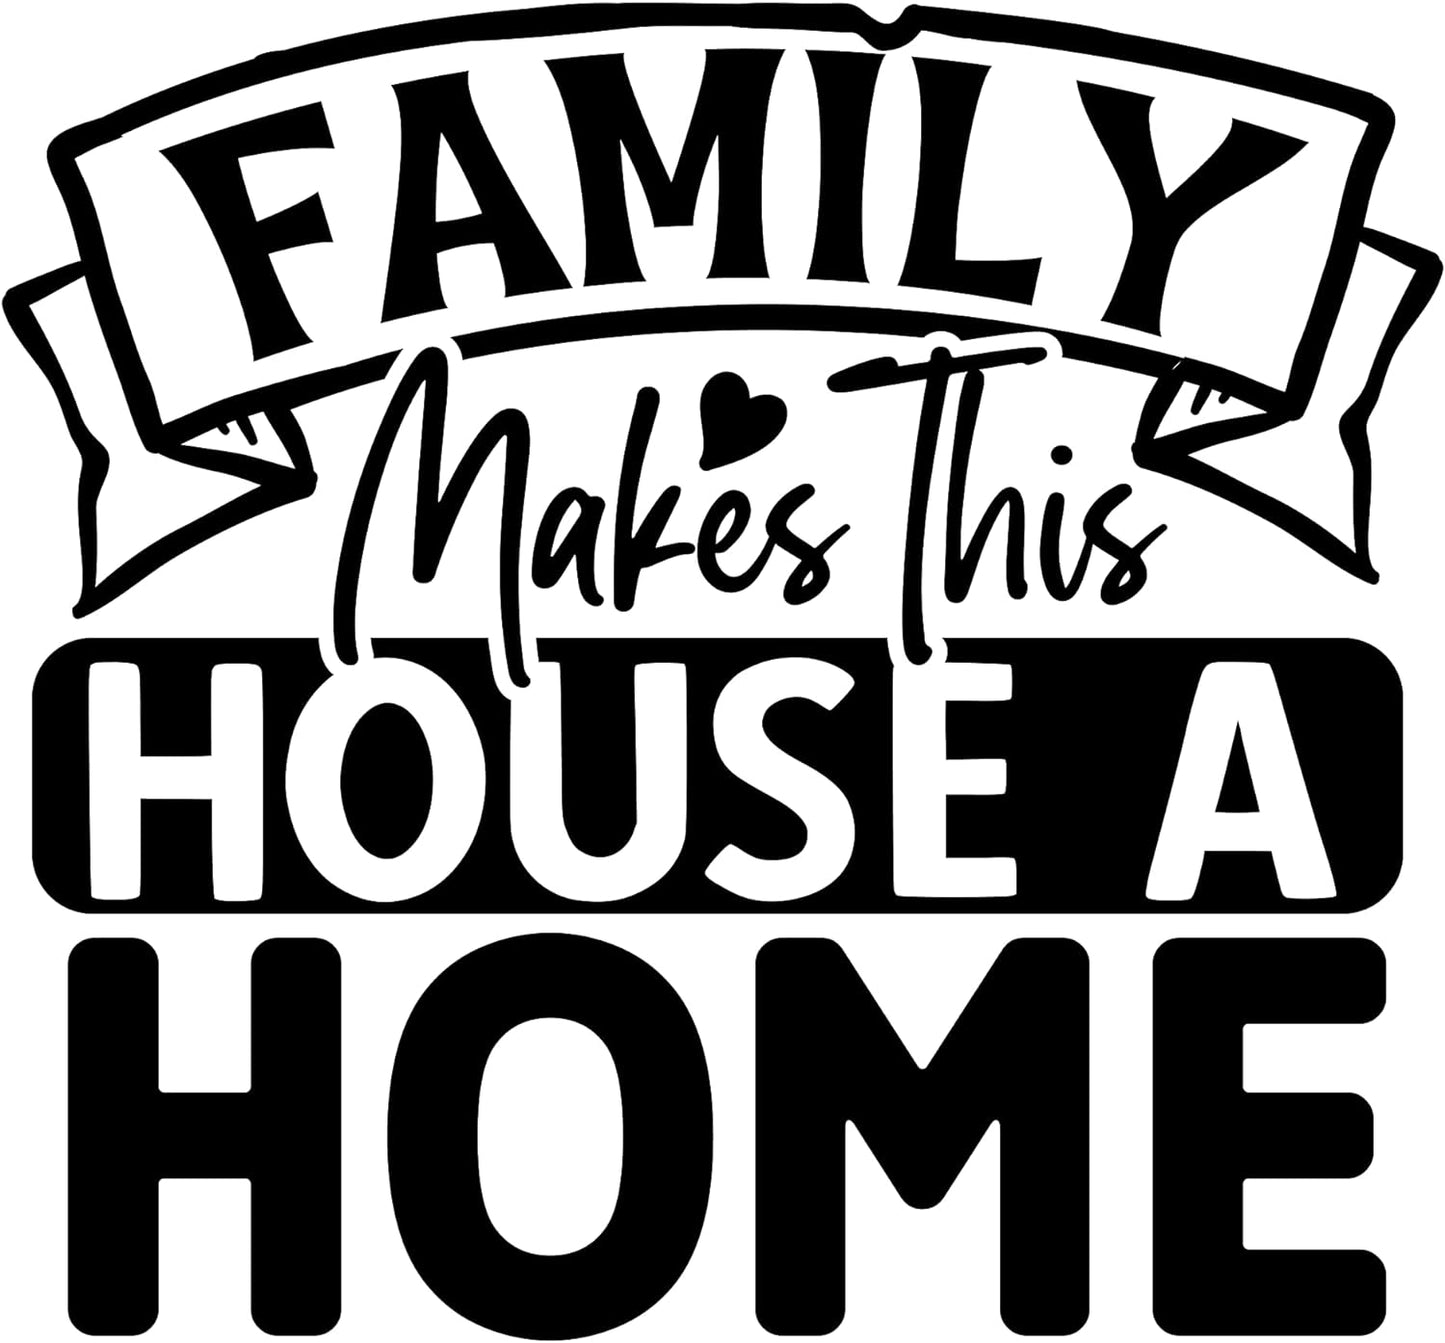 Inspirational Quote "Family Makes This House Home" Motivational Sticker Vinyl Decal Motivation Stickers- 5" Vinyl Sticker Waterproof